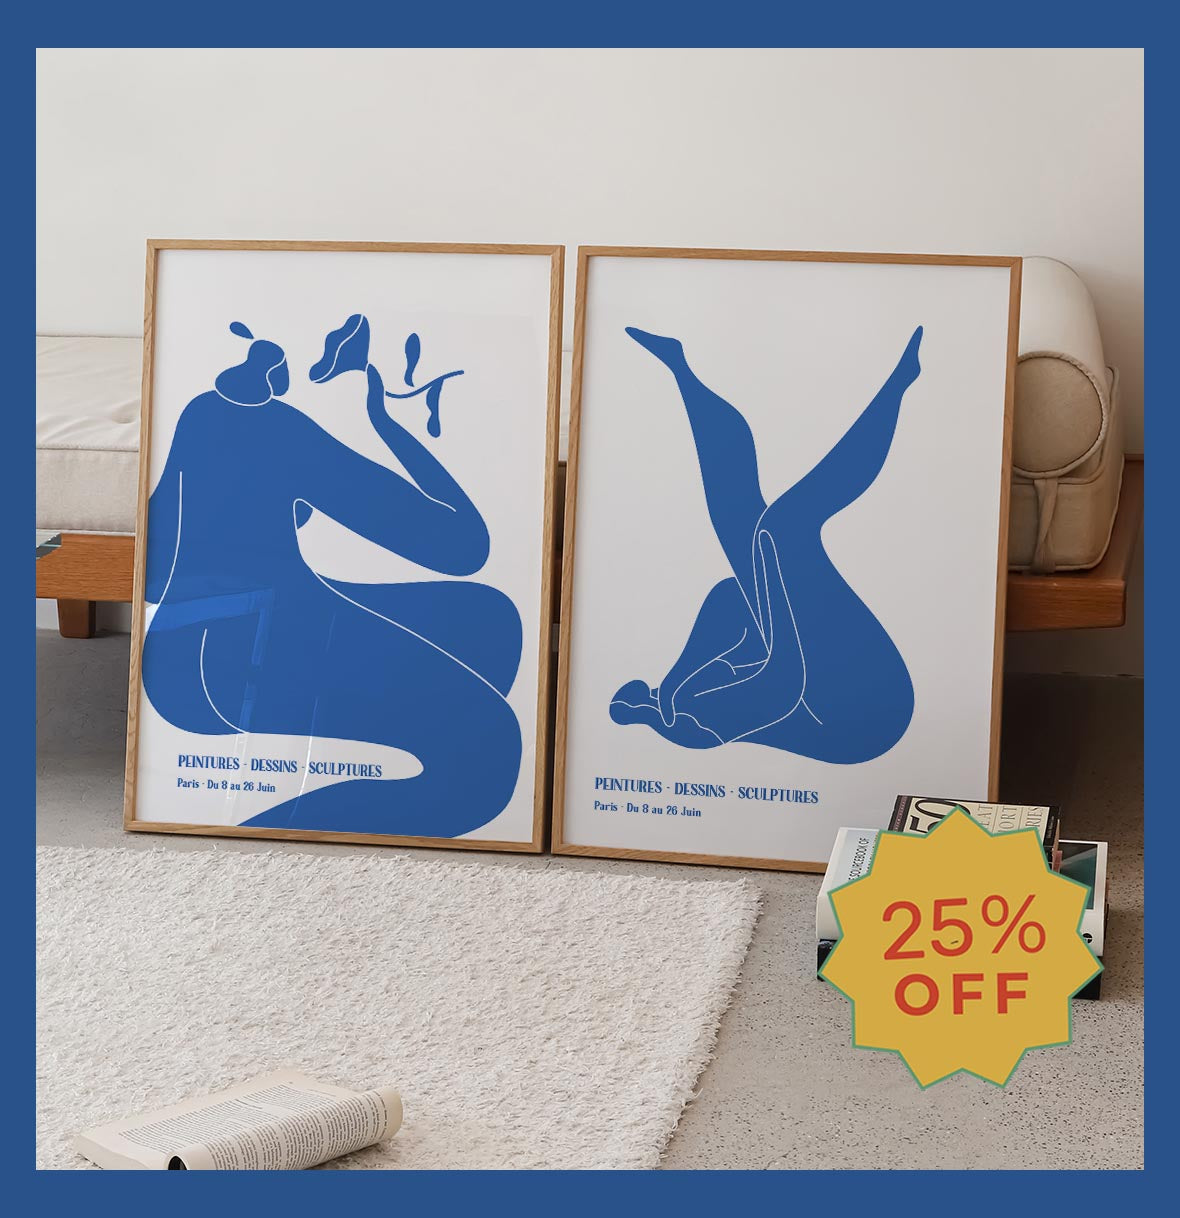 "Abstract blue silhouette posters of human forms titled 'Blue I and Blue II' in wooden frames with a 25% off discount badge, set in a modern home decor setting.